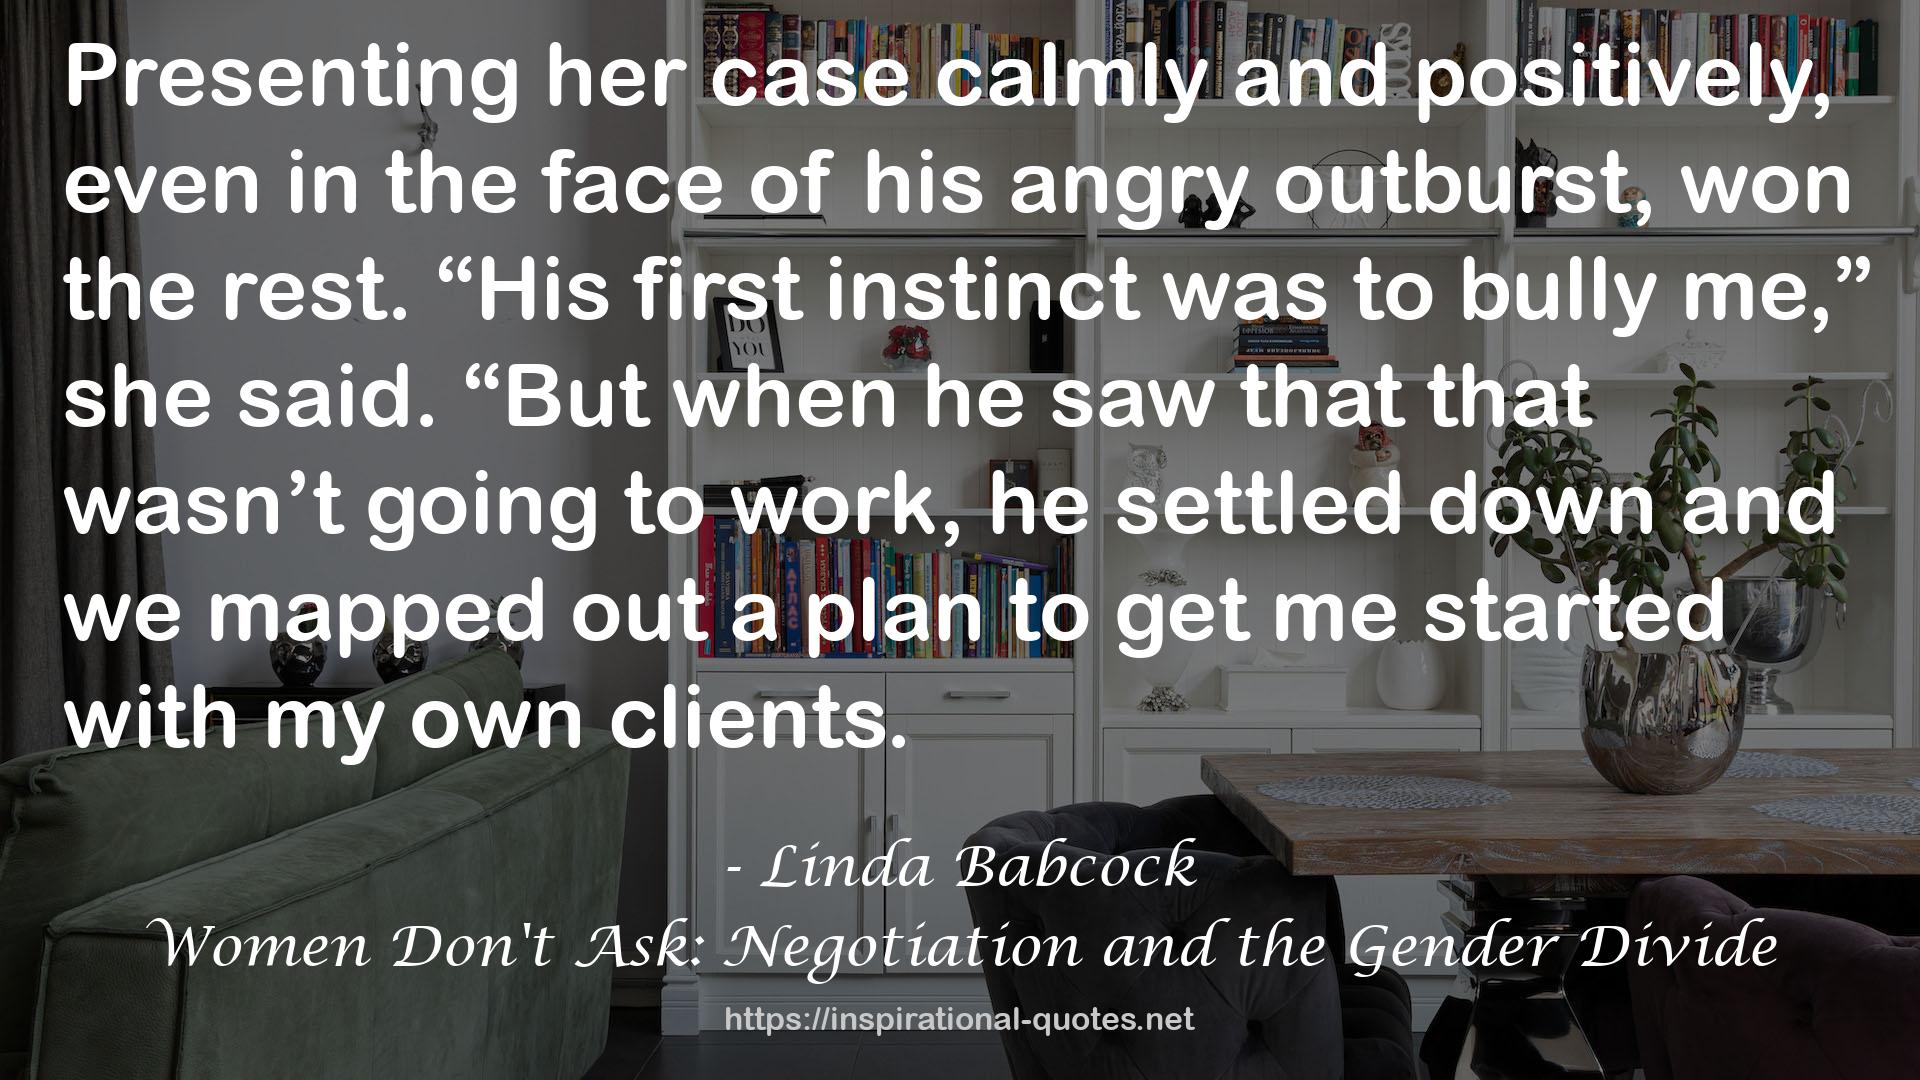 Women Don't Ask: Negotiation and the Gender Divide QUOTES